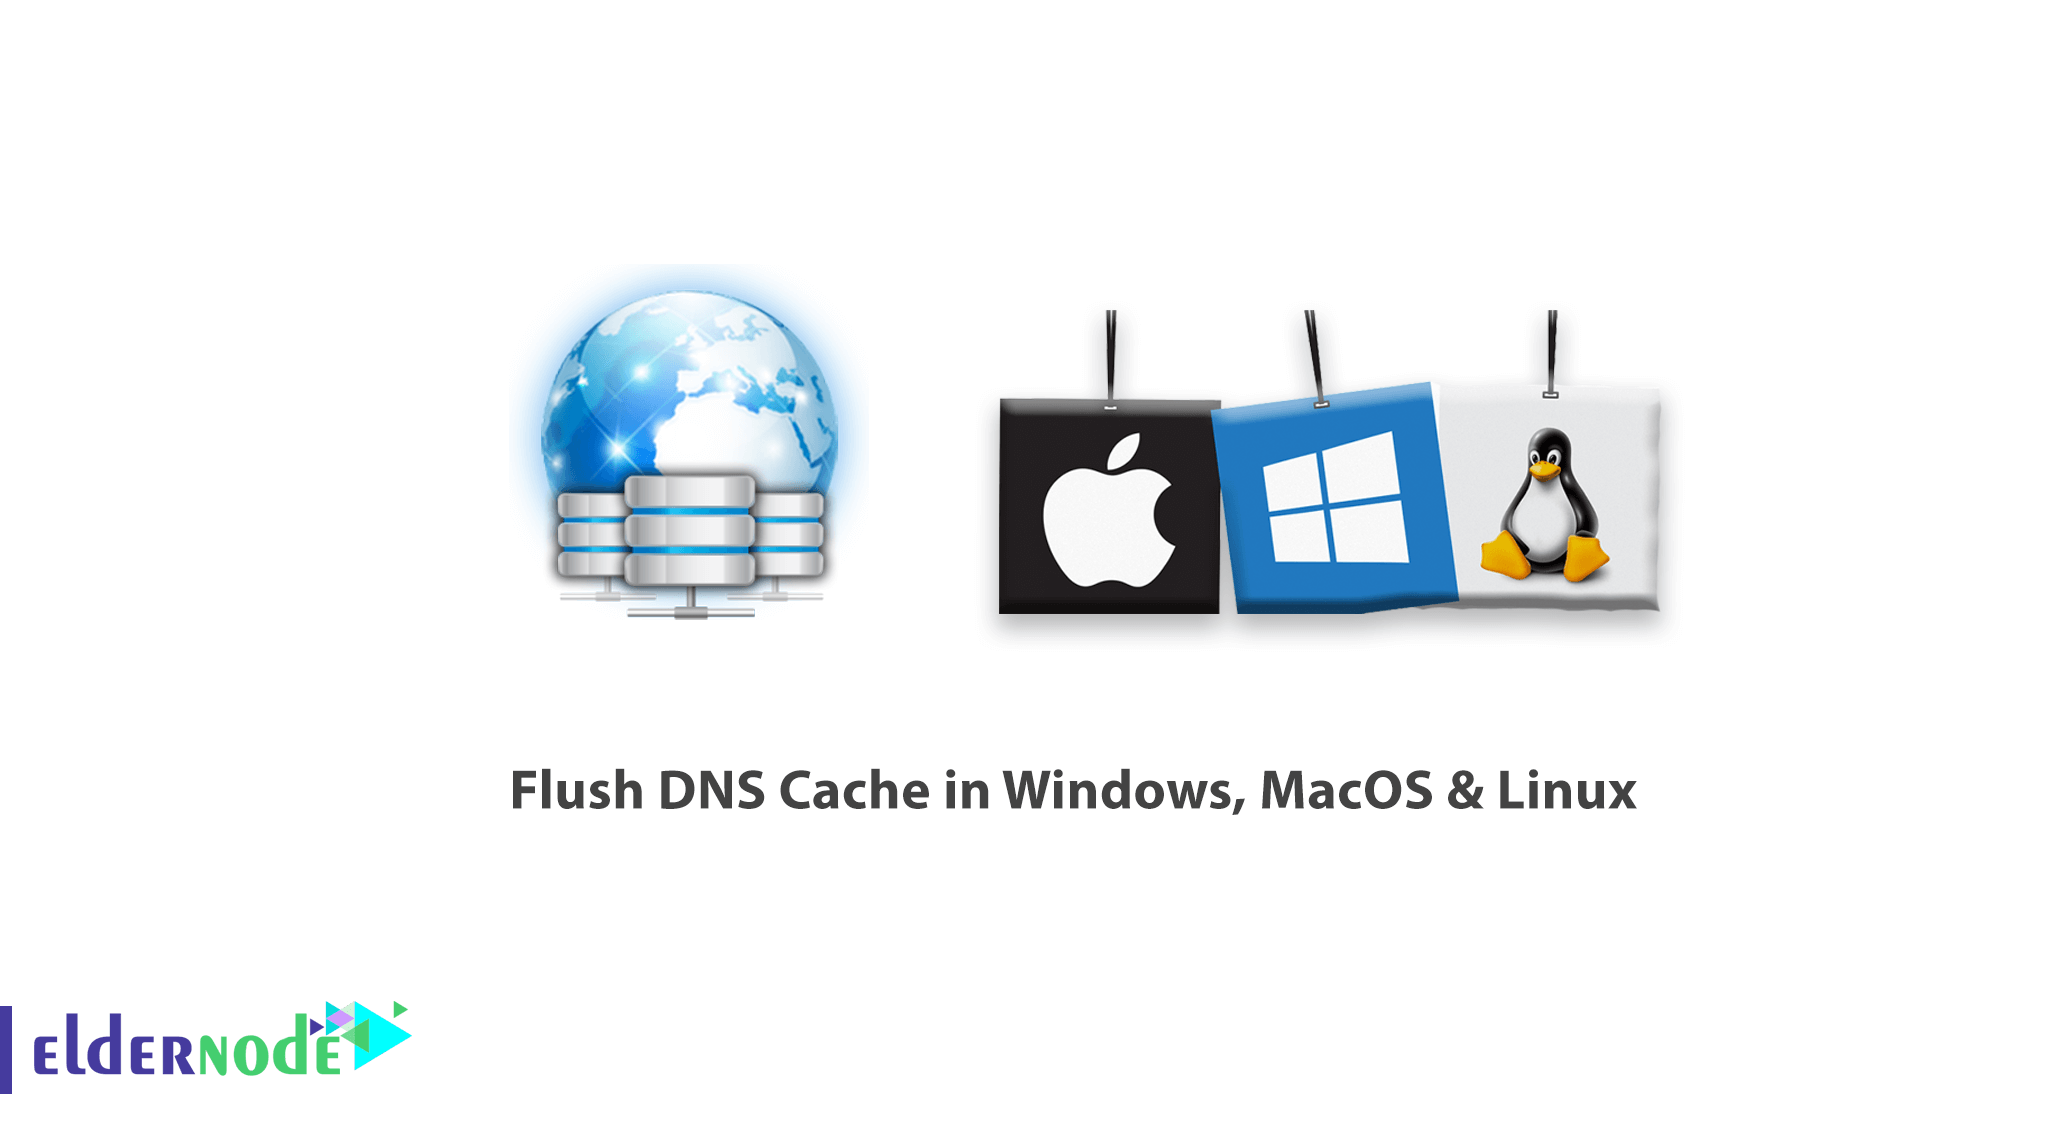 How To Flush DNS Cache in Windows, MacOS & Linux